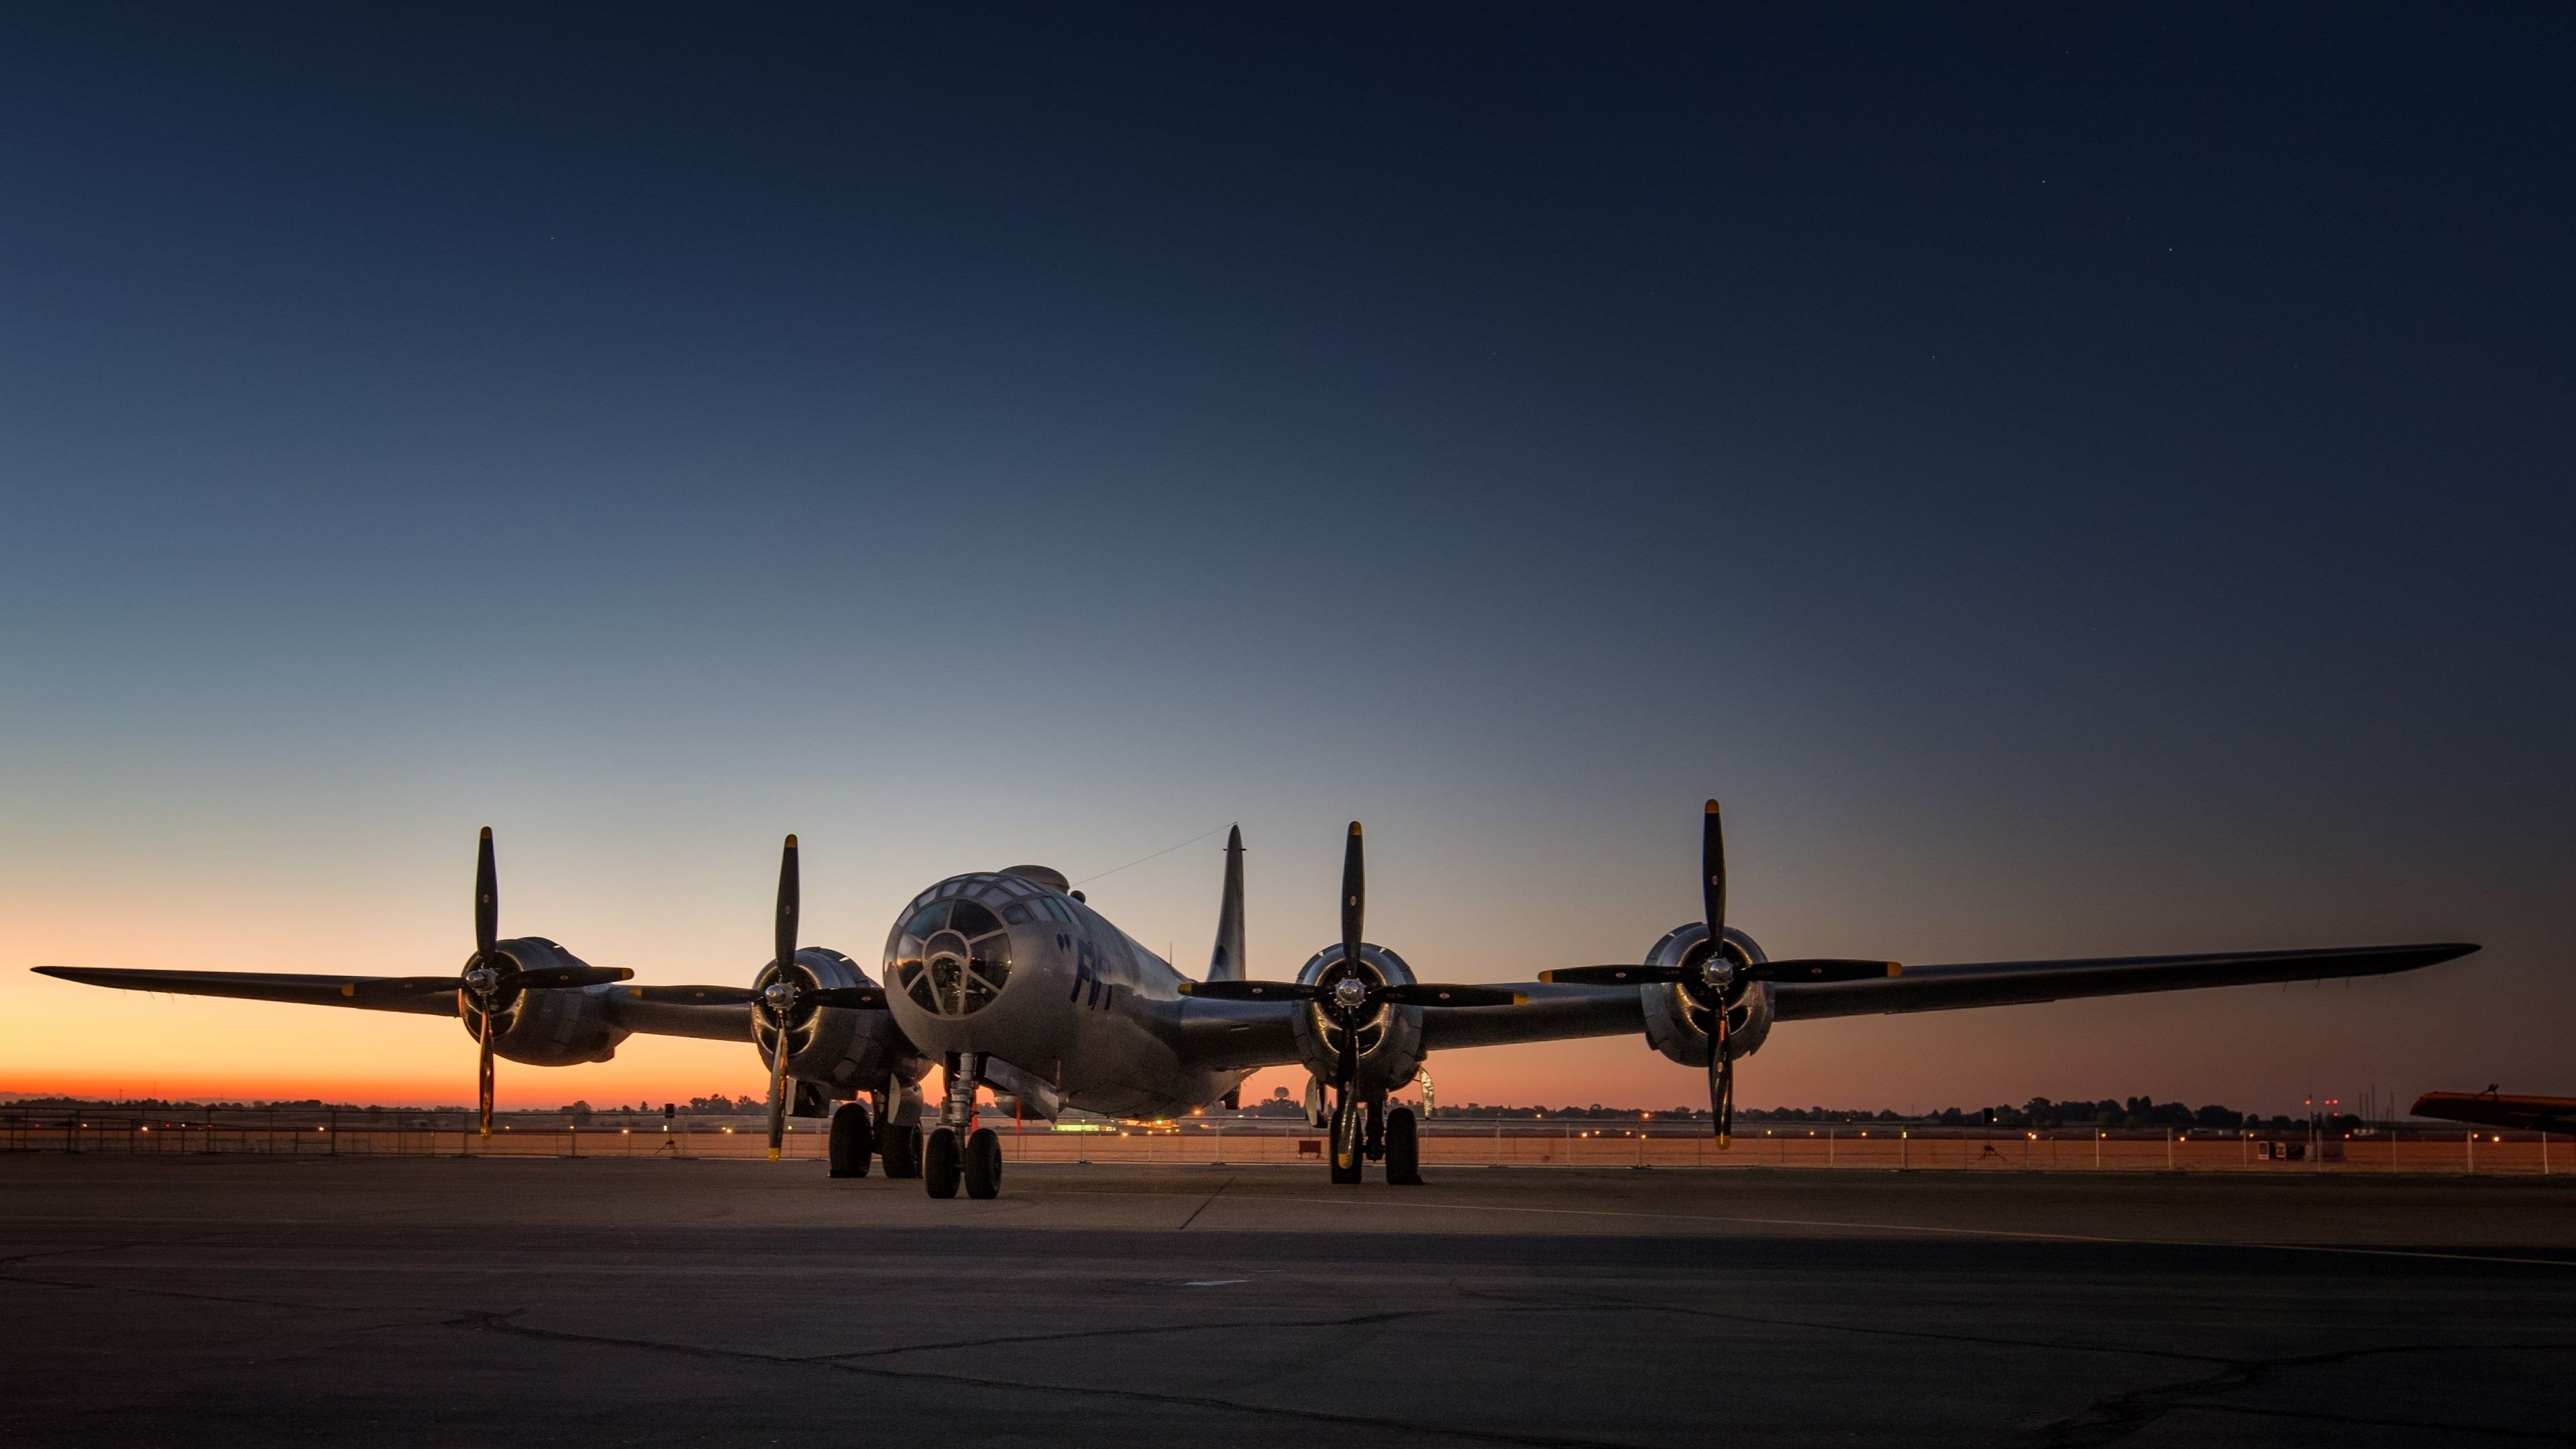 Boeing Superfortress, Historic aircraft, Flying fortress, Military bomber, 3840x2160 4K Desktop